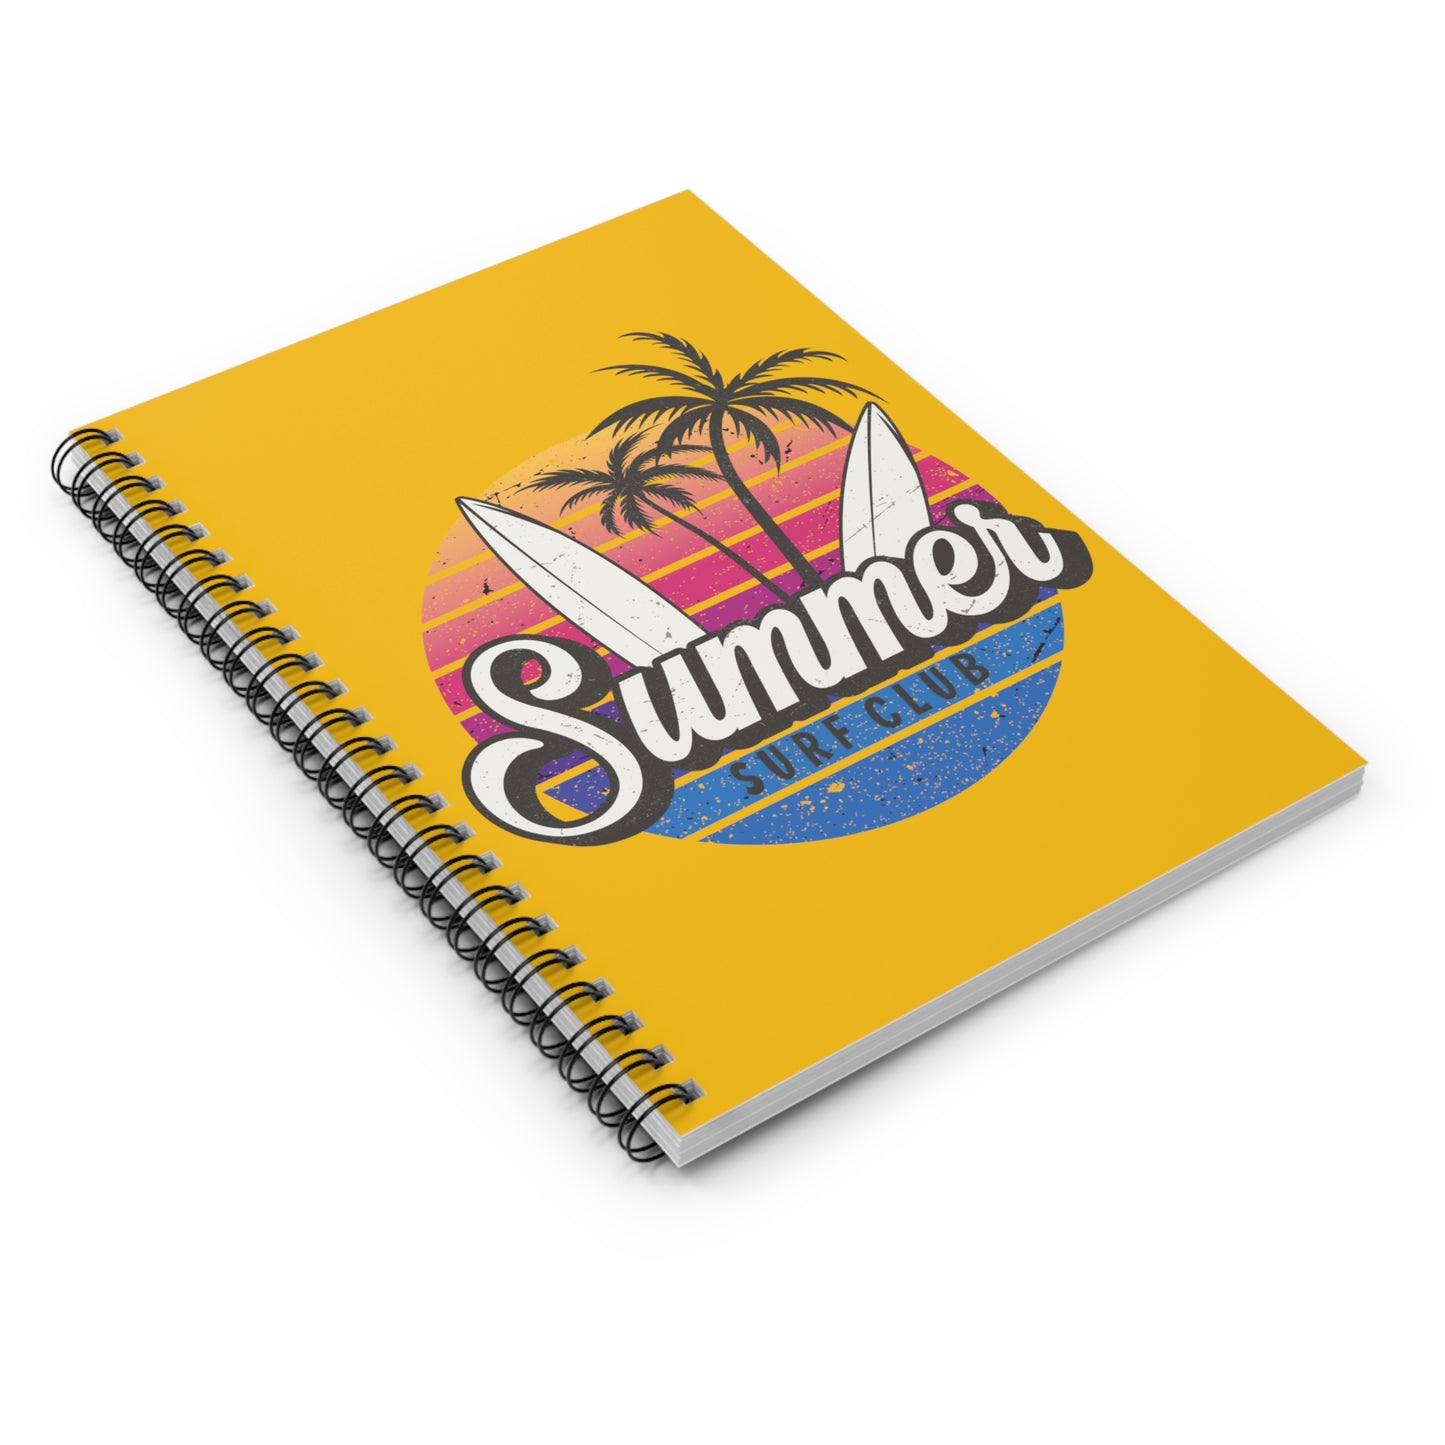 Summer Surf Club: Spiral Notebook - Log Books - Journals - Diaries - and More Custom Printed by TheGlassyLass.com